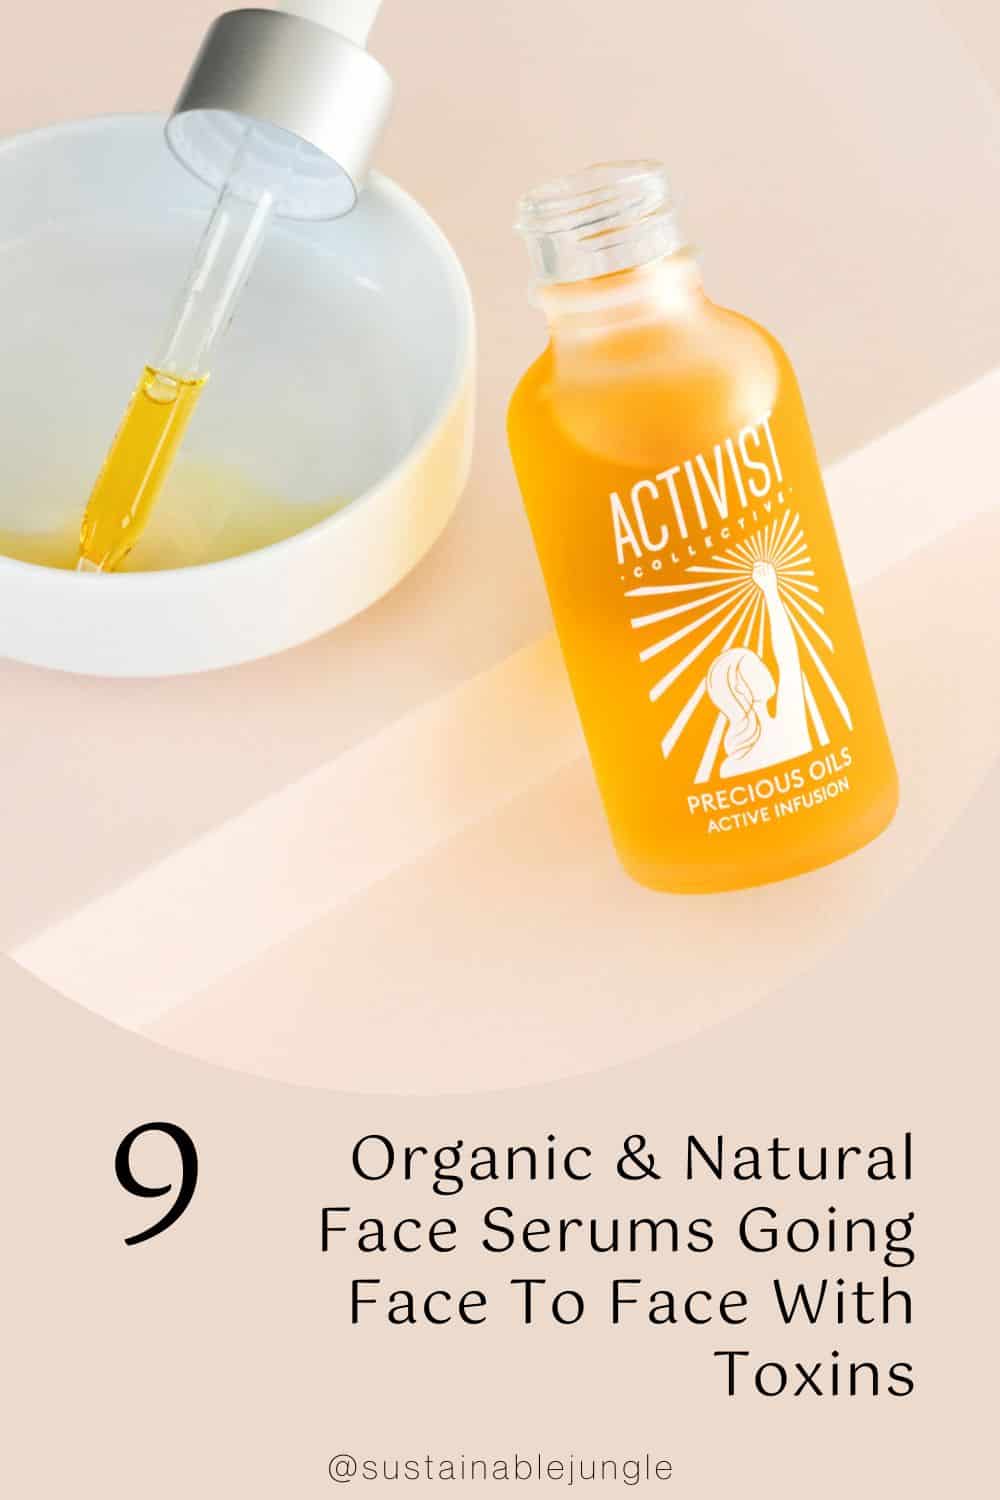 9 Organic & Natural Face Serums Going Face To Face With Toxins Image by Activist #naturalfaceserums #naturalfacialserum #bestnaturalserumsforface #organicfaceserums #organicfacialserums #nourishorganicfaceserum #sustainablejungle